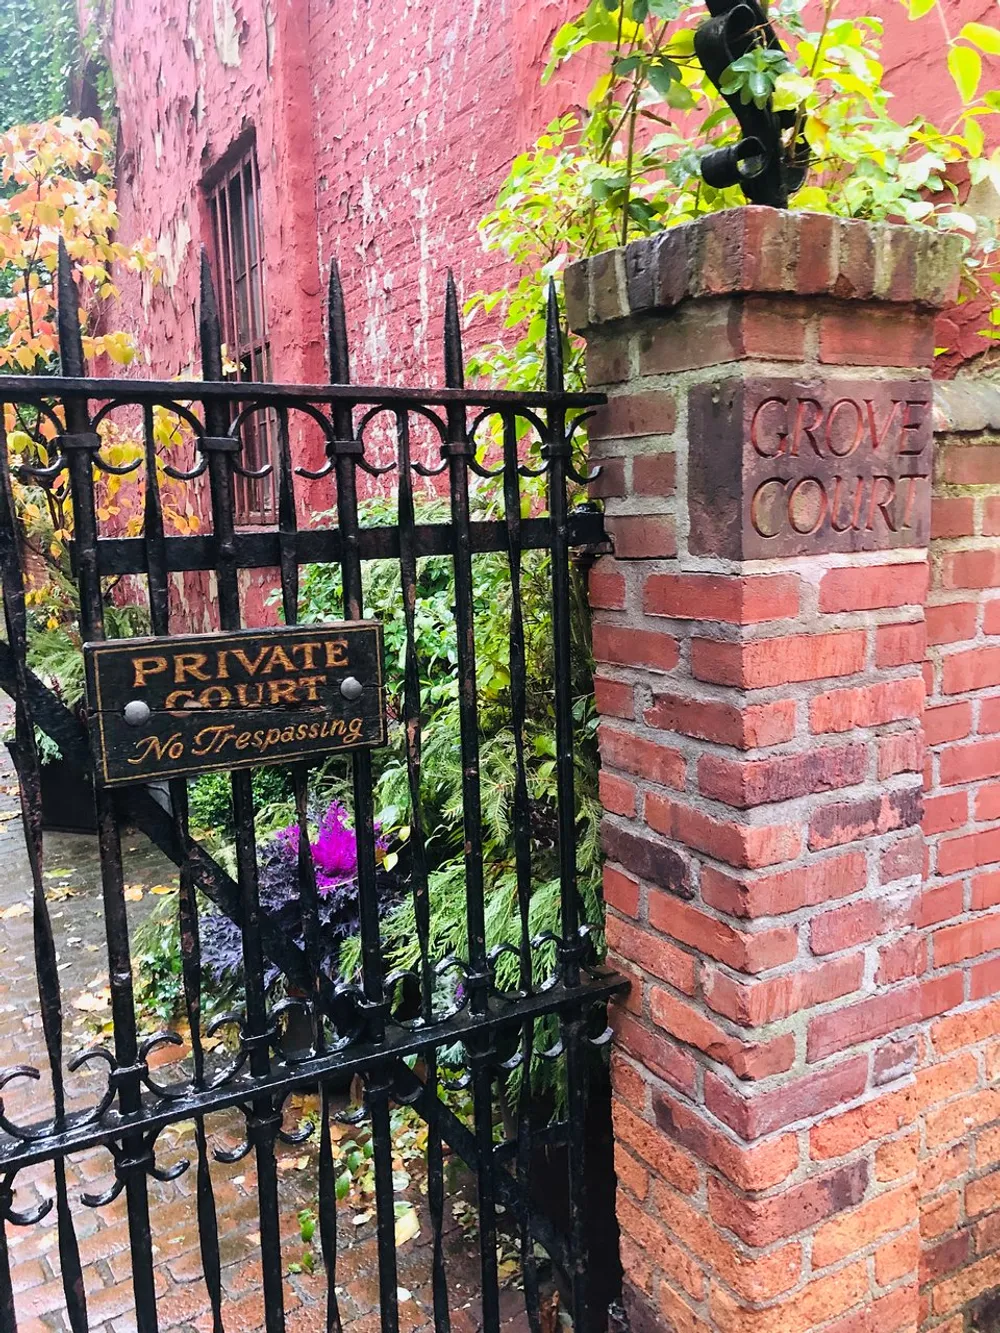 The image shows a weathered brick pillar with the engraved words GROVE COURT next to a black wrought iron gate that bears a sign reading PRIVATE COURT No Trespassing leading to a garden behind it